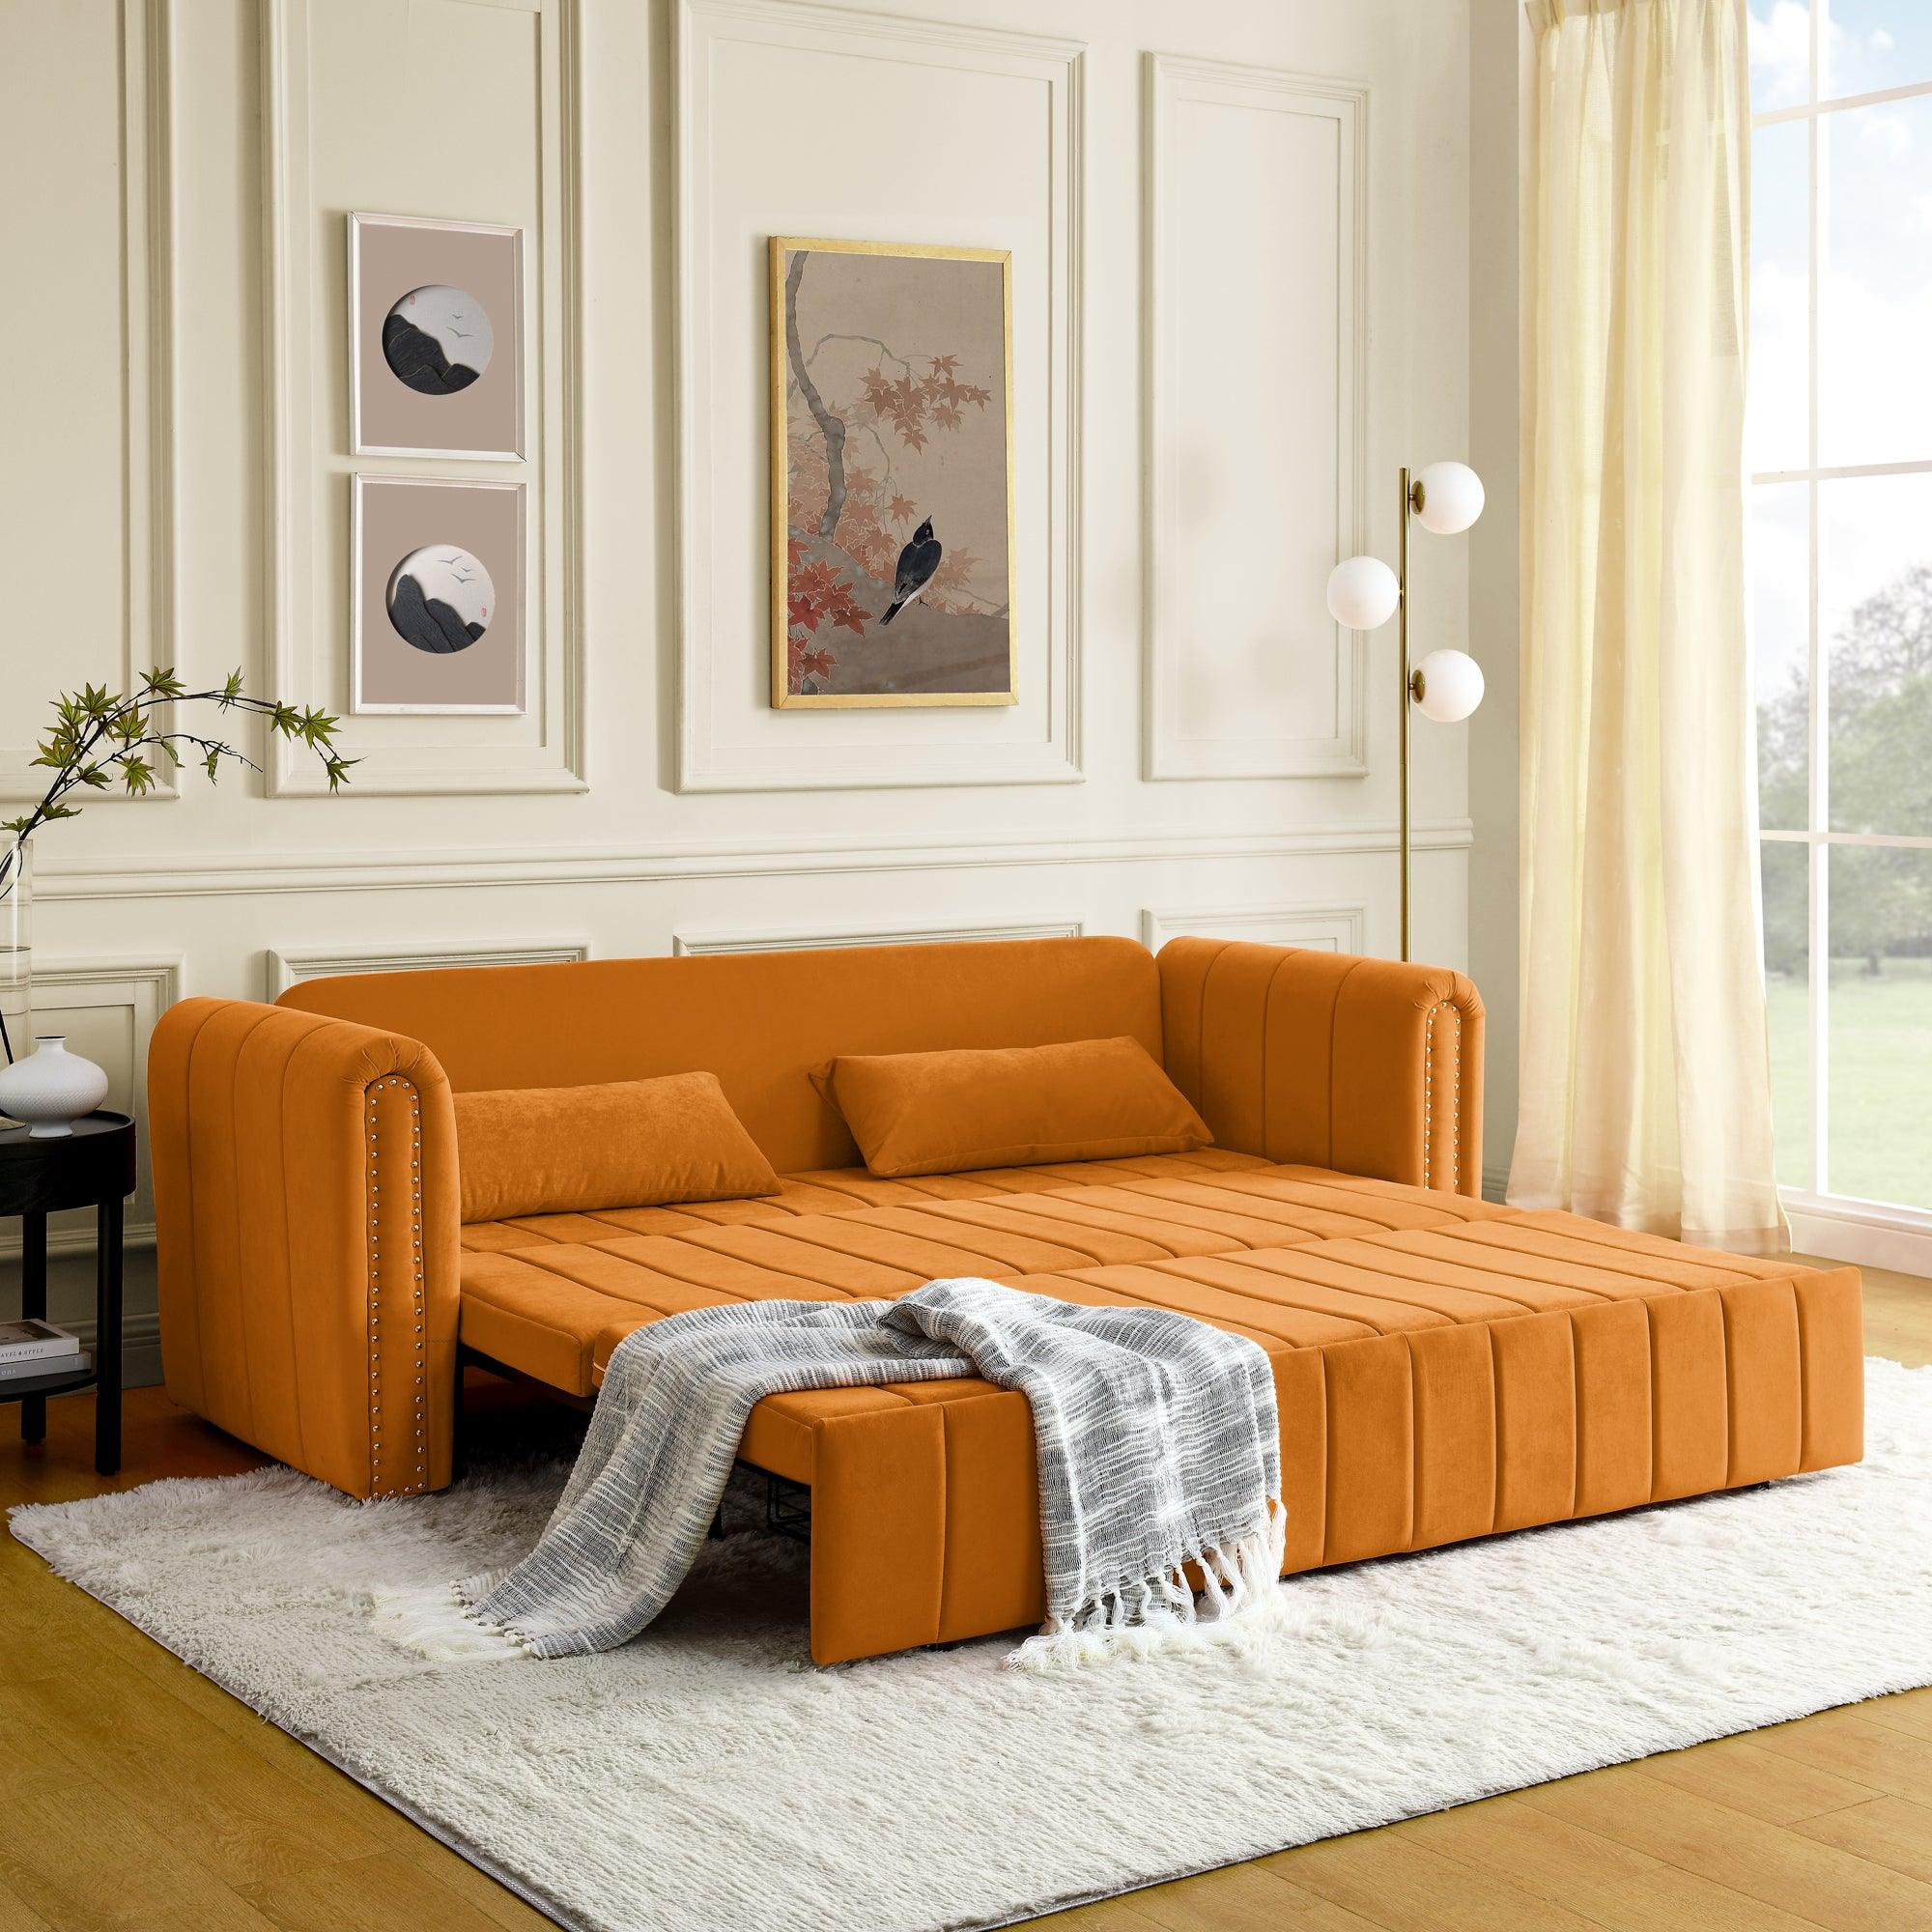 🆓🚛 3 in 1 Pull-Out Bed Sleeper Sofa, Rolled Arms, Copper Nails, 2 Drawers, 2 Pillows, Orange